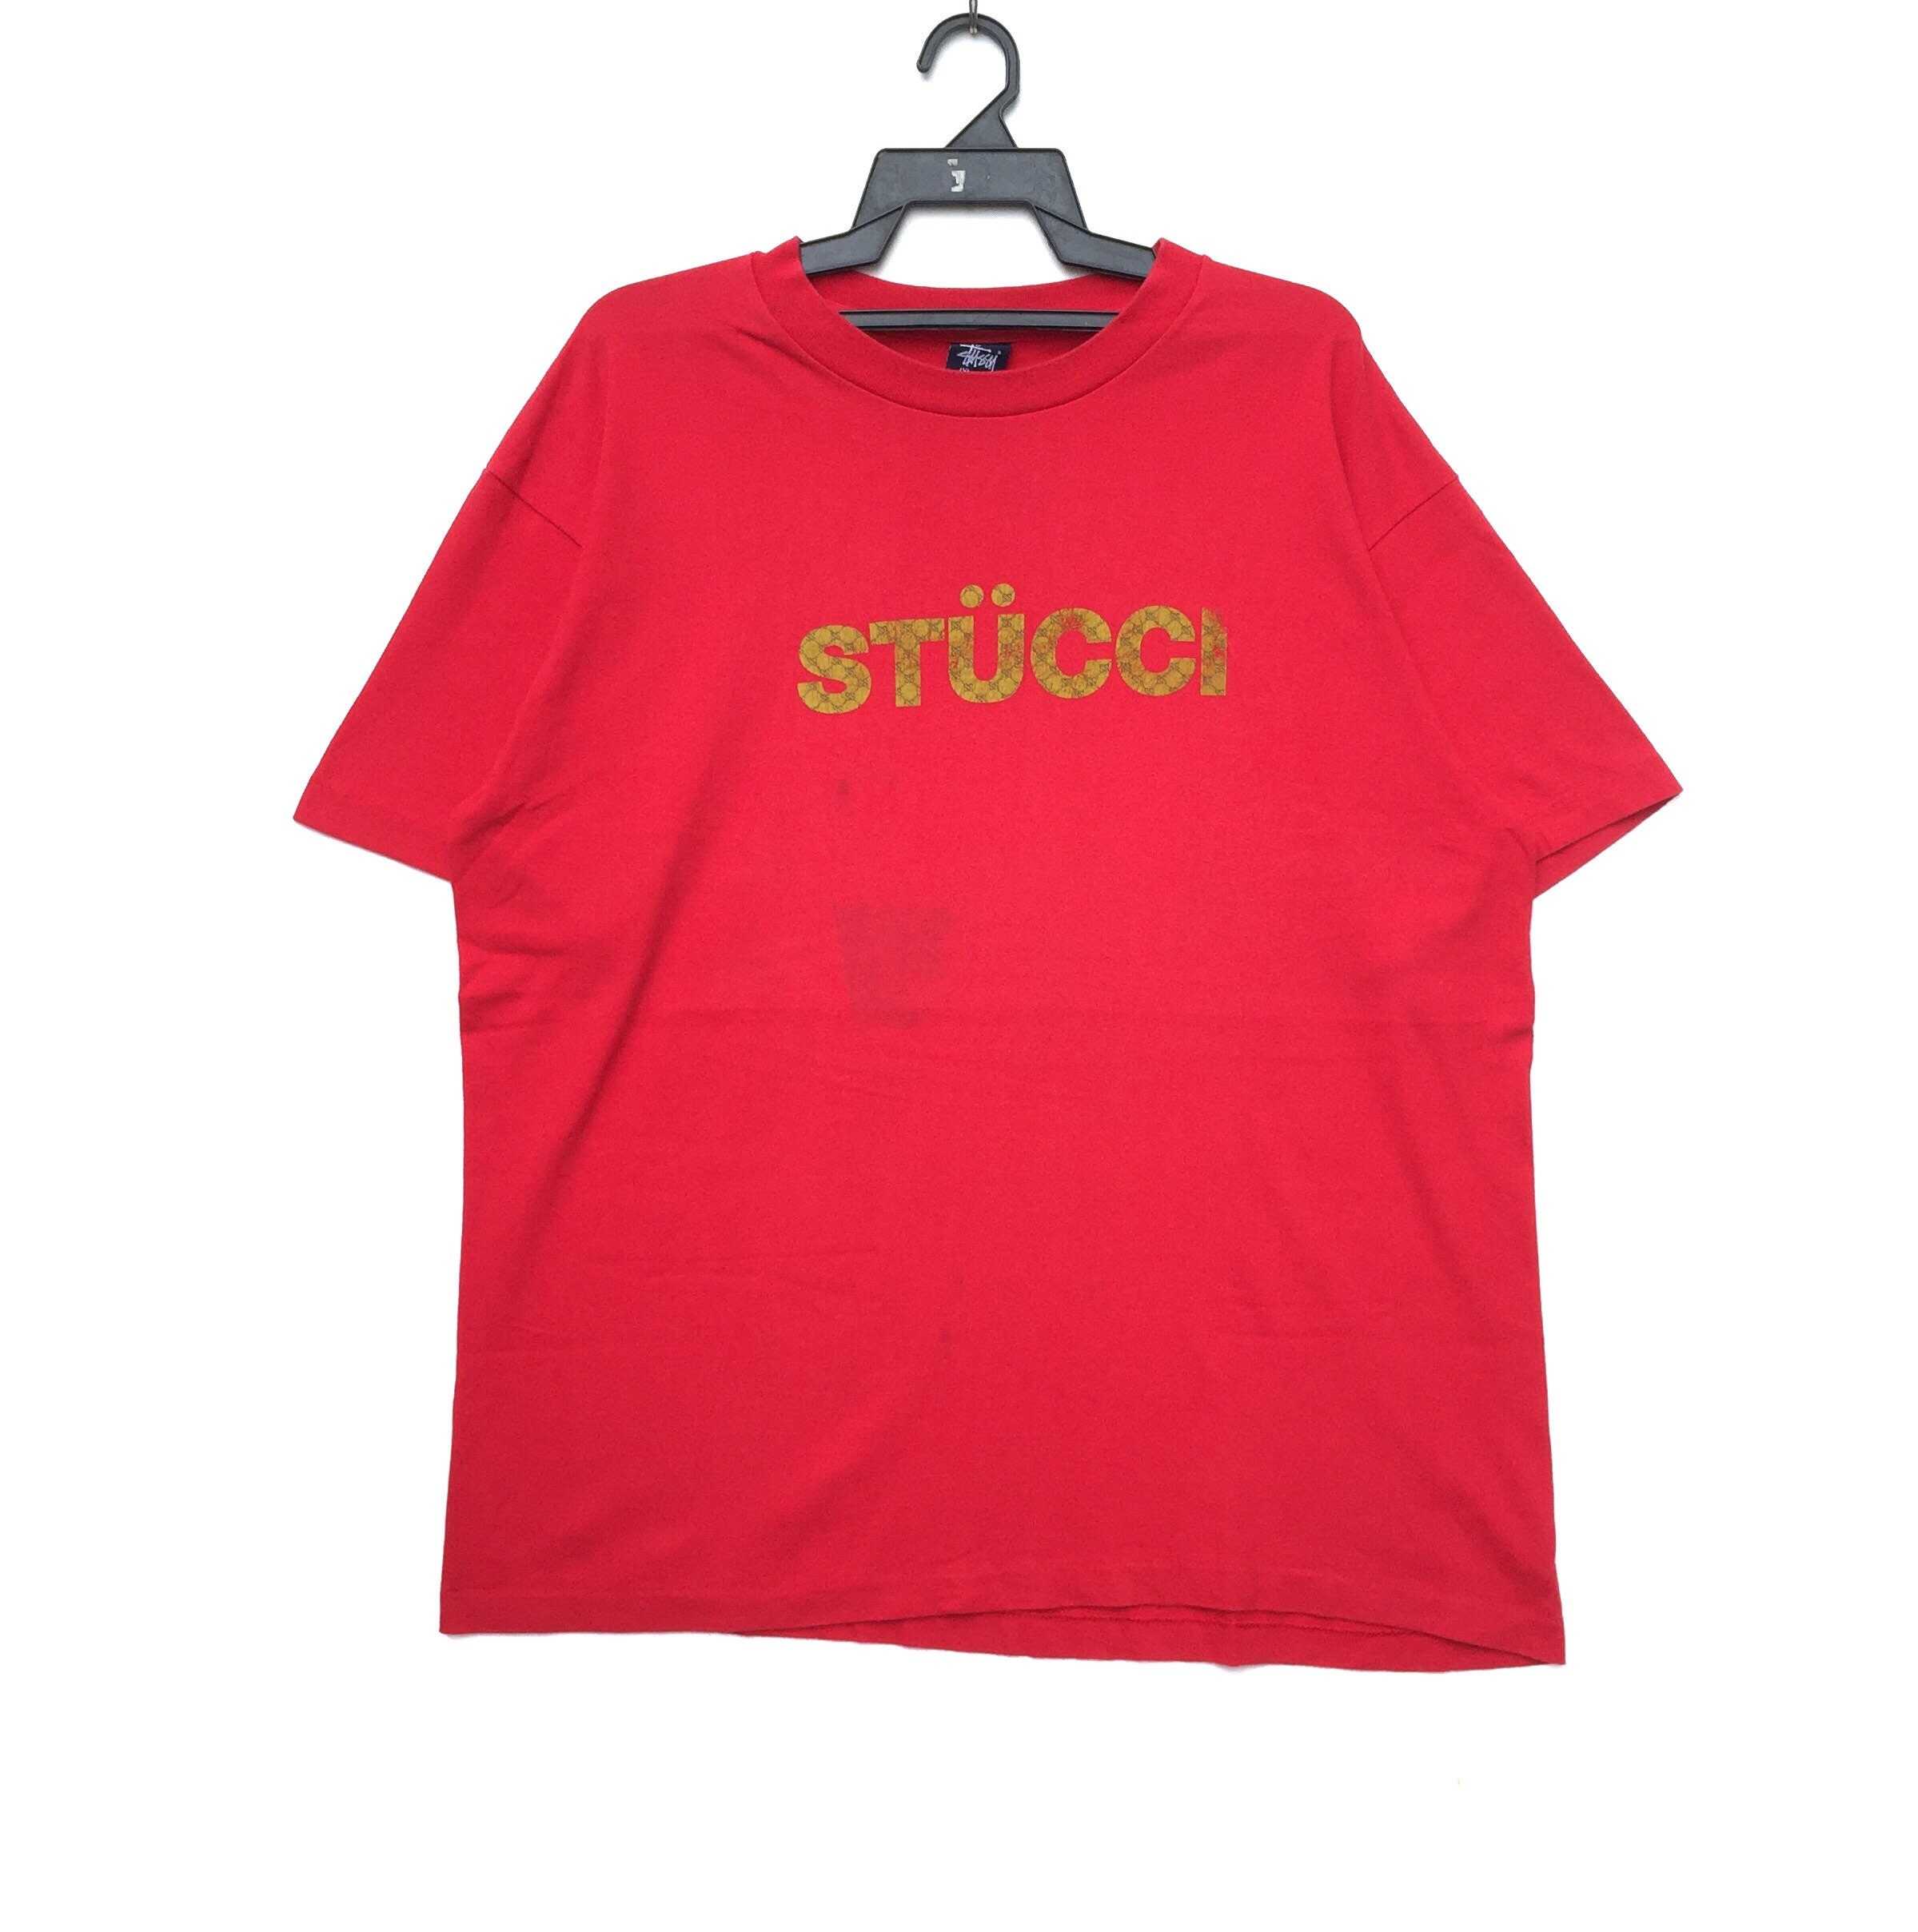 Rare Vintage 90s Stussy Stucci T-shirt Stussy Spell Out T-shirt